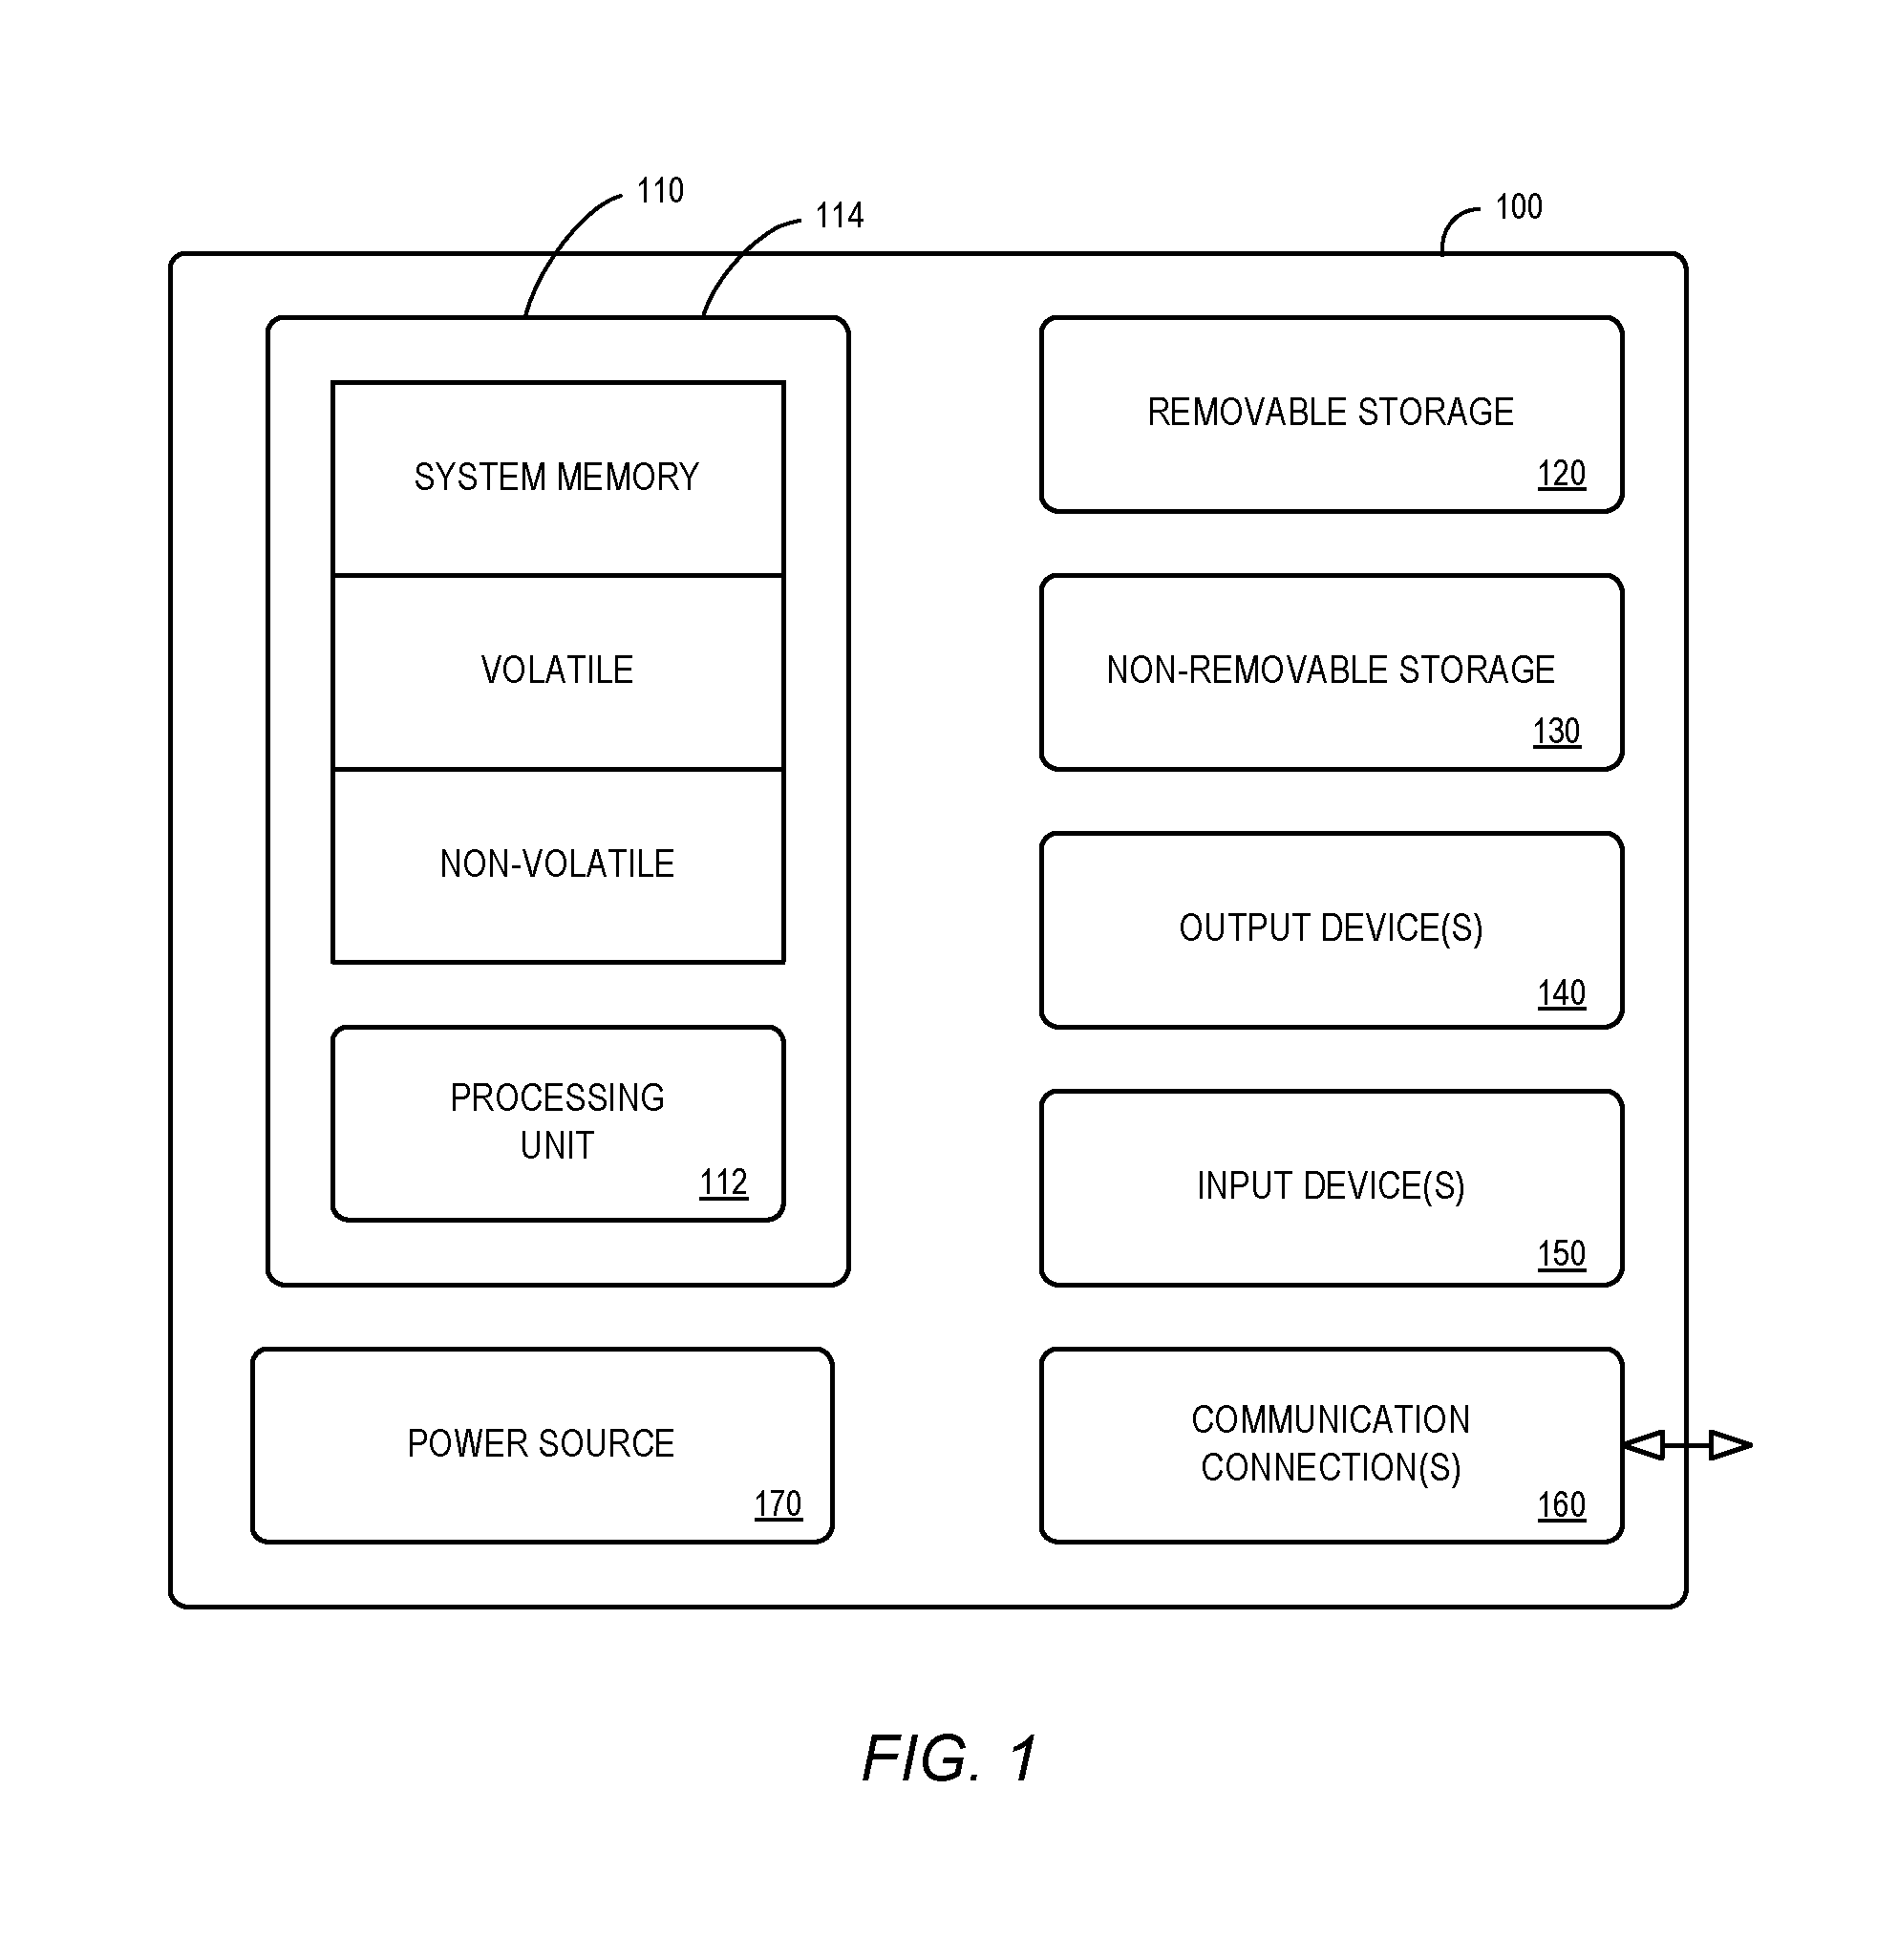 Dynamic adjustment of a wireless network media access control parameter